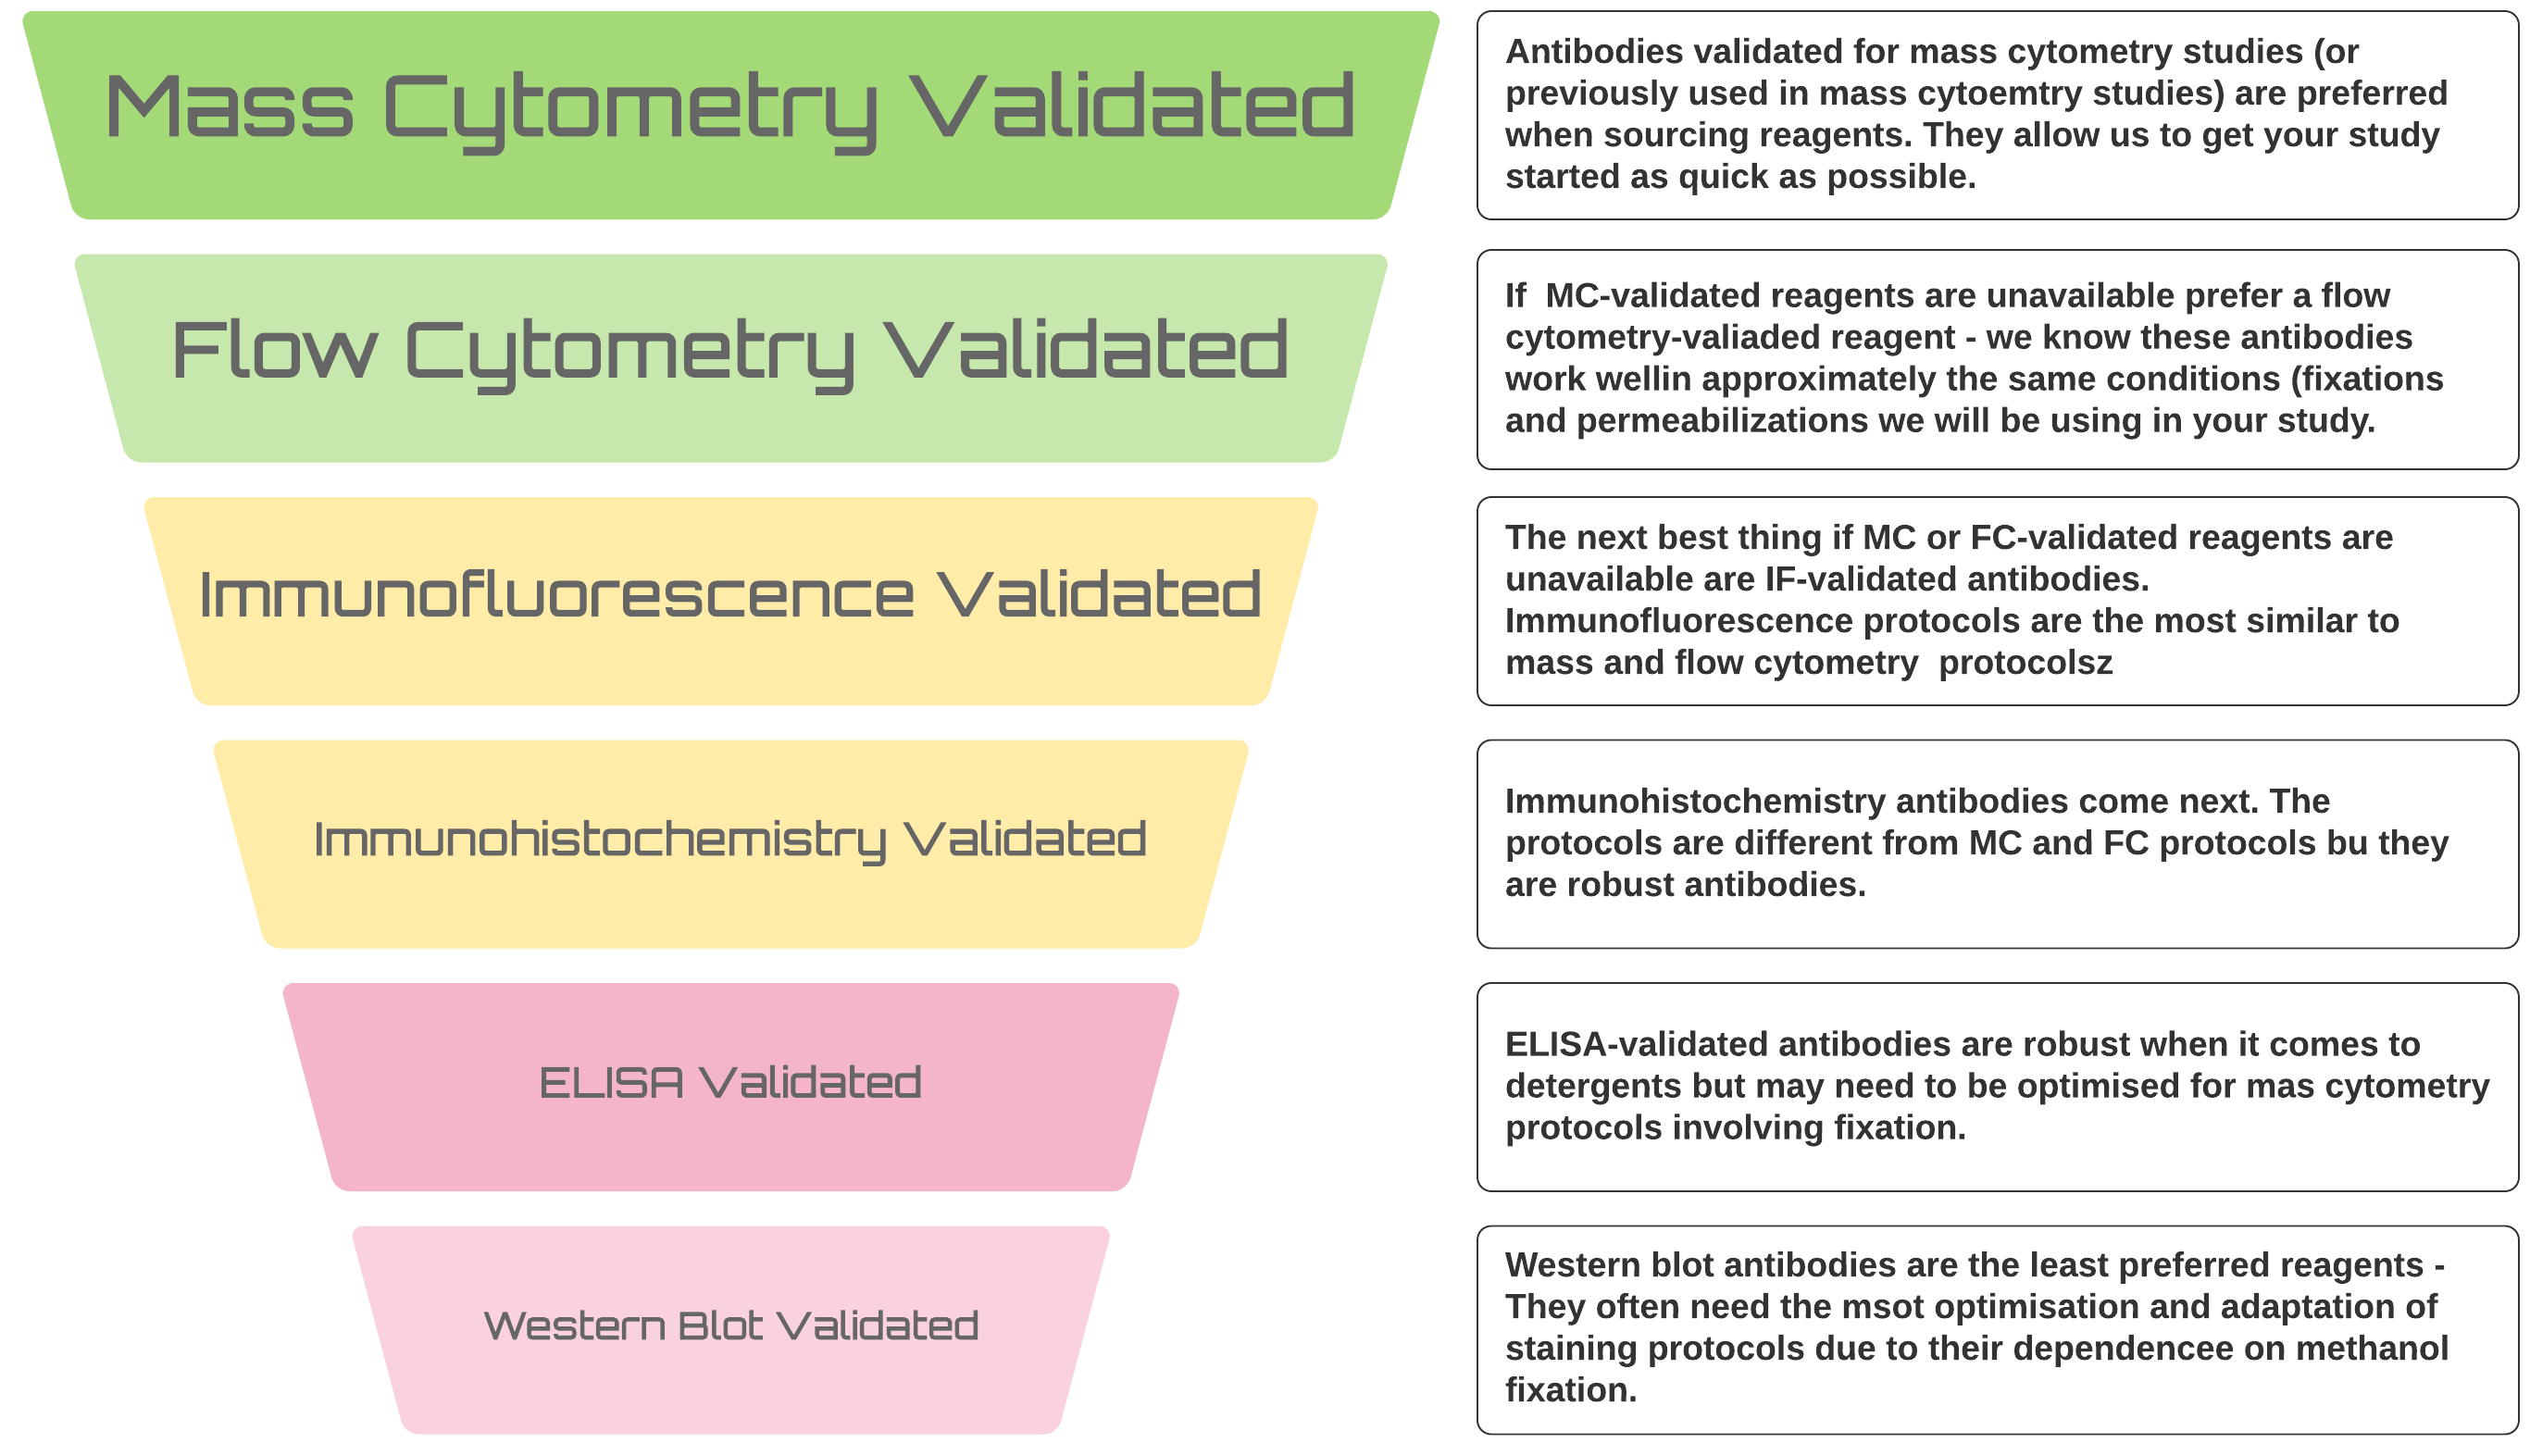 With optimisation, we can get any probe working for your mass cytometry study but there is a definite hierarchy of preferences when it comes to sourcing reagents